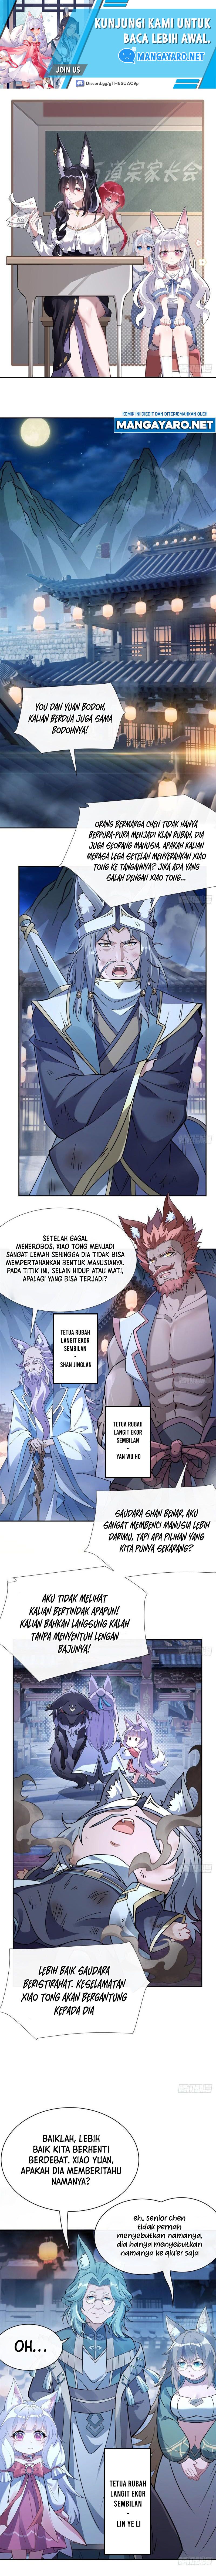 Dilarang COPAS - situs resmi www.mangacanblog.com - Komik my female apprentices are all big shots from the future 178 - chapter 178 179 Indonesia my female apprentices are all big shots from the future 178 - chapter 178 Terbaru 1|Baca Manga Komik Indonesia|Mangacan